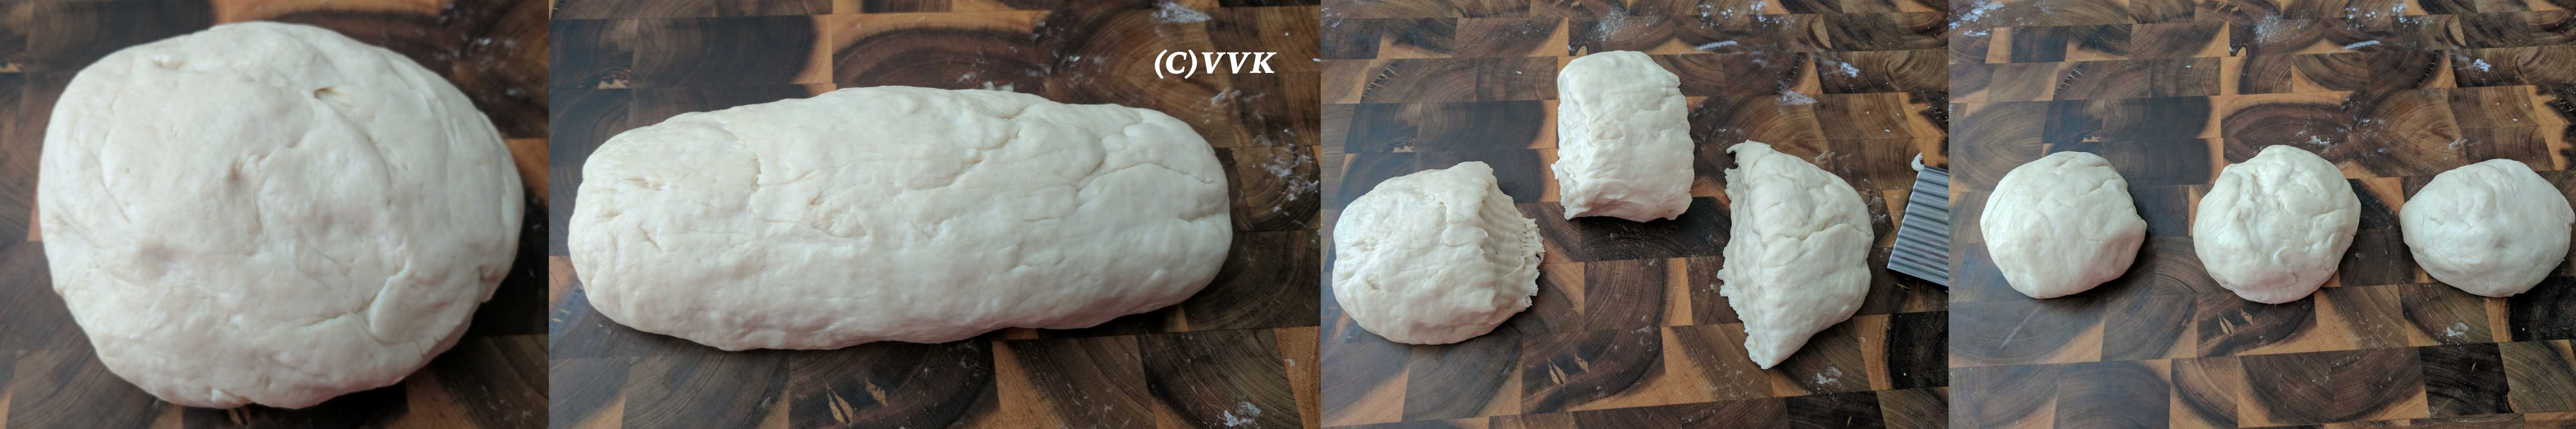 Rolling the dough into a single log and dividing it into three equal portions